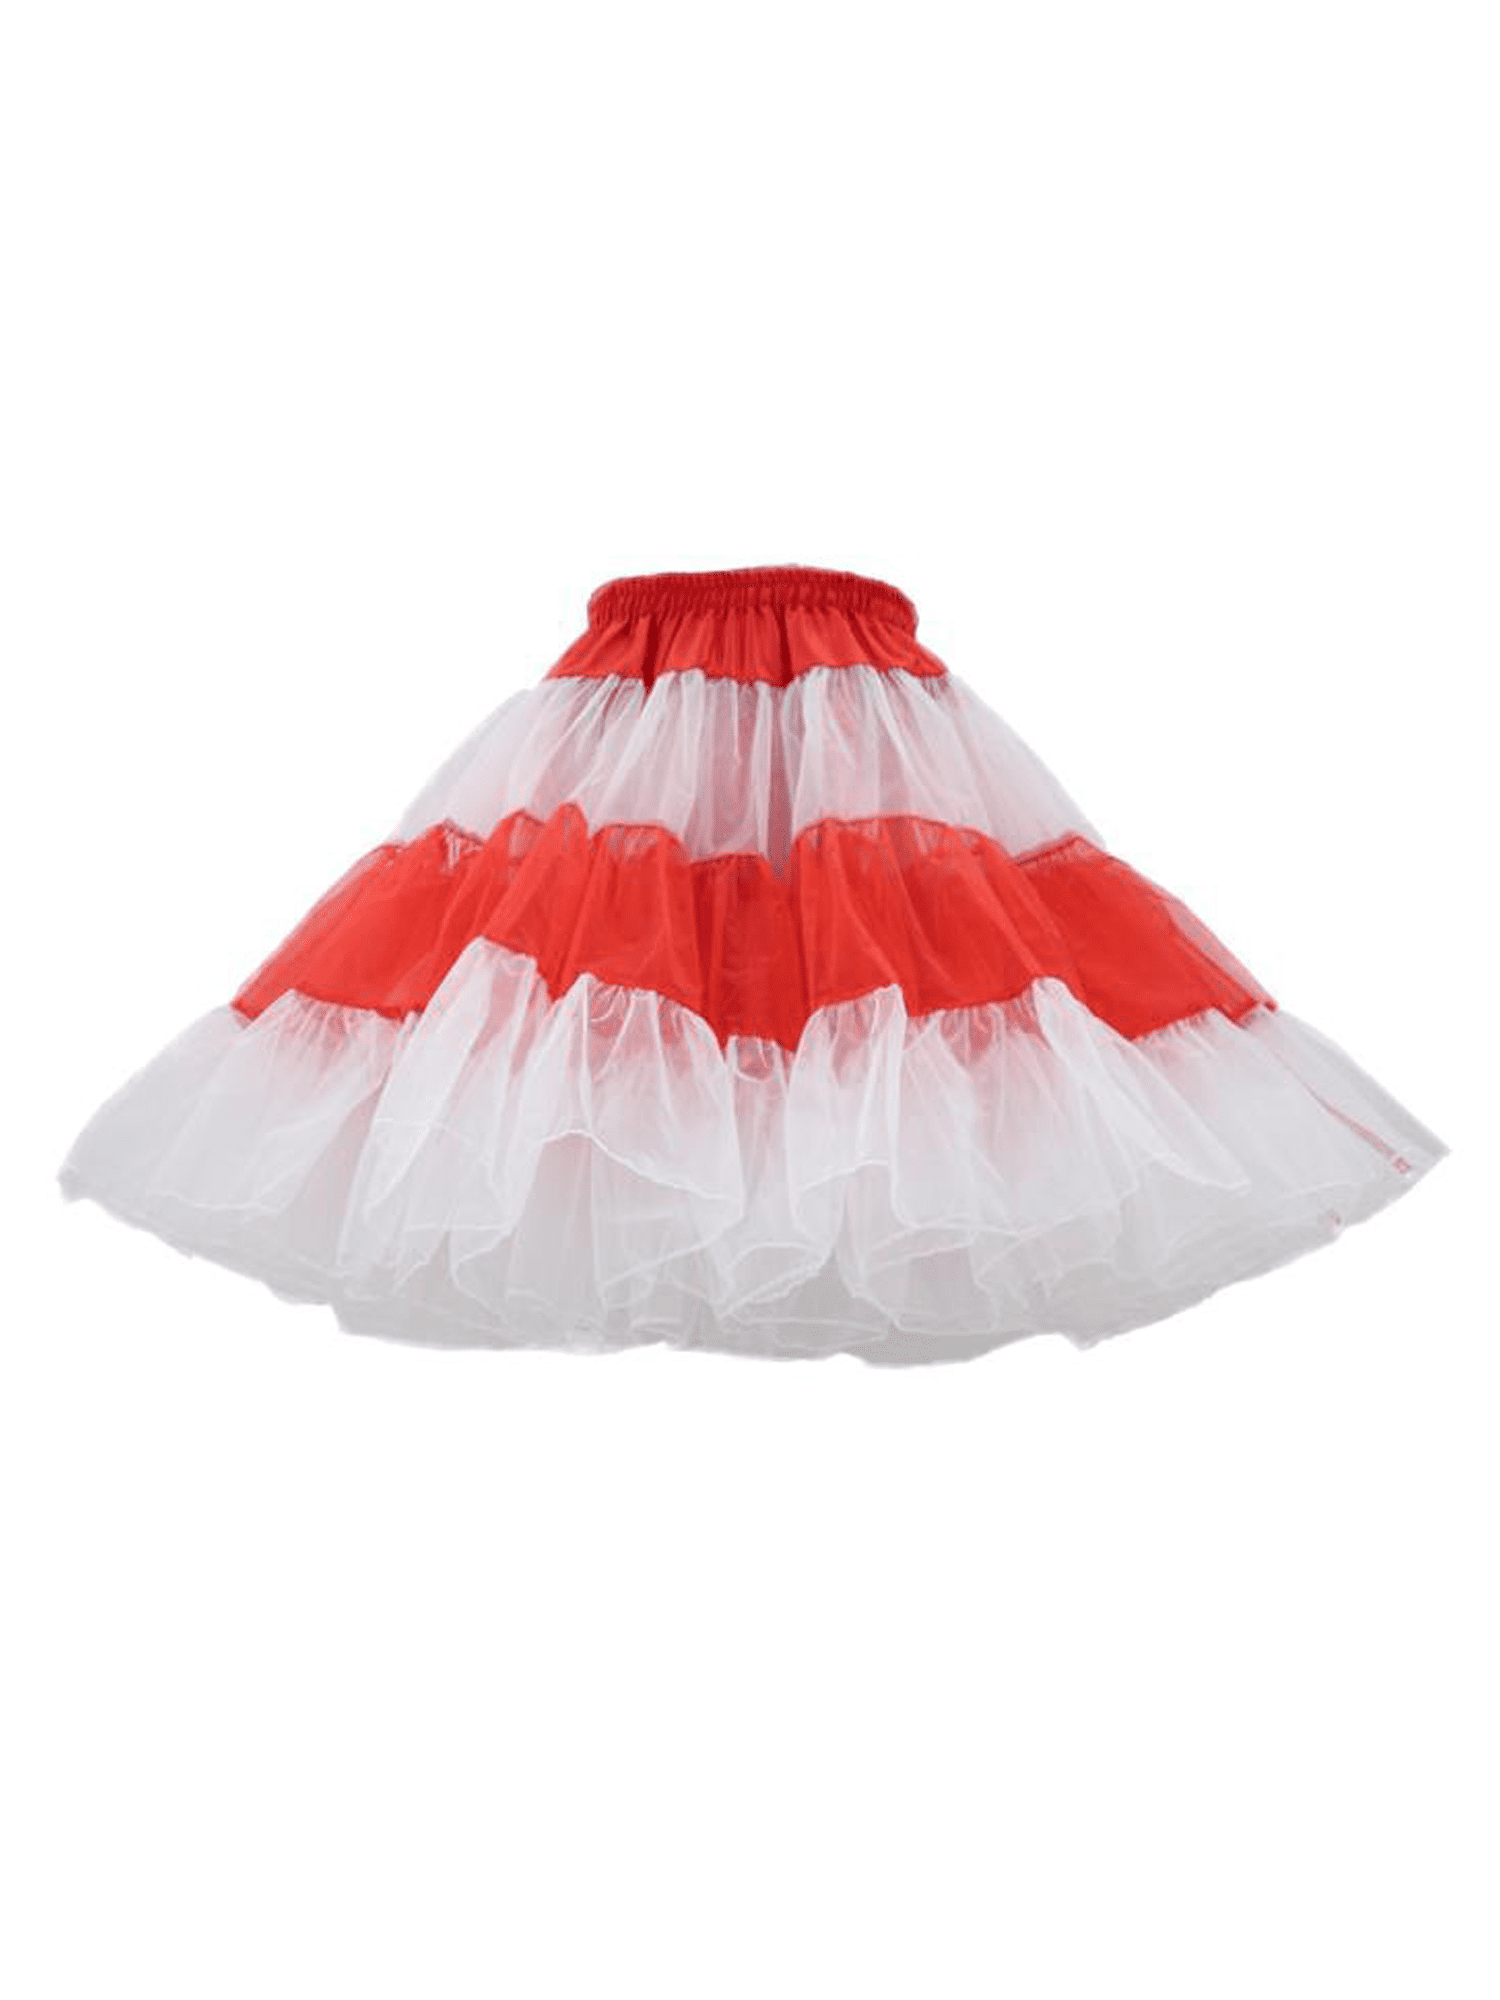 New tutu pettiskirt stripes red skirt CANDY CANE stripes Christmas  2-4  years